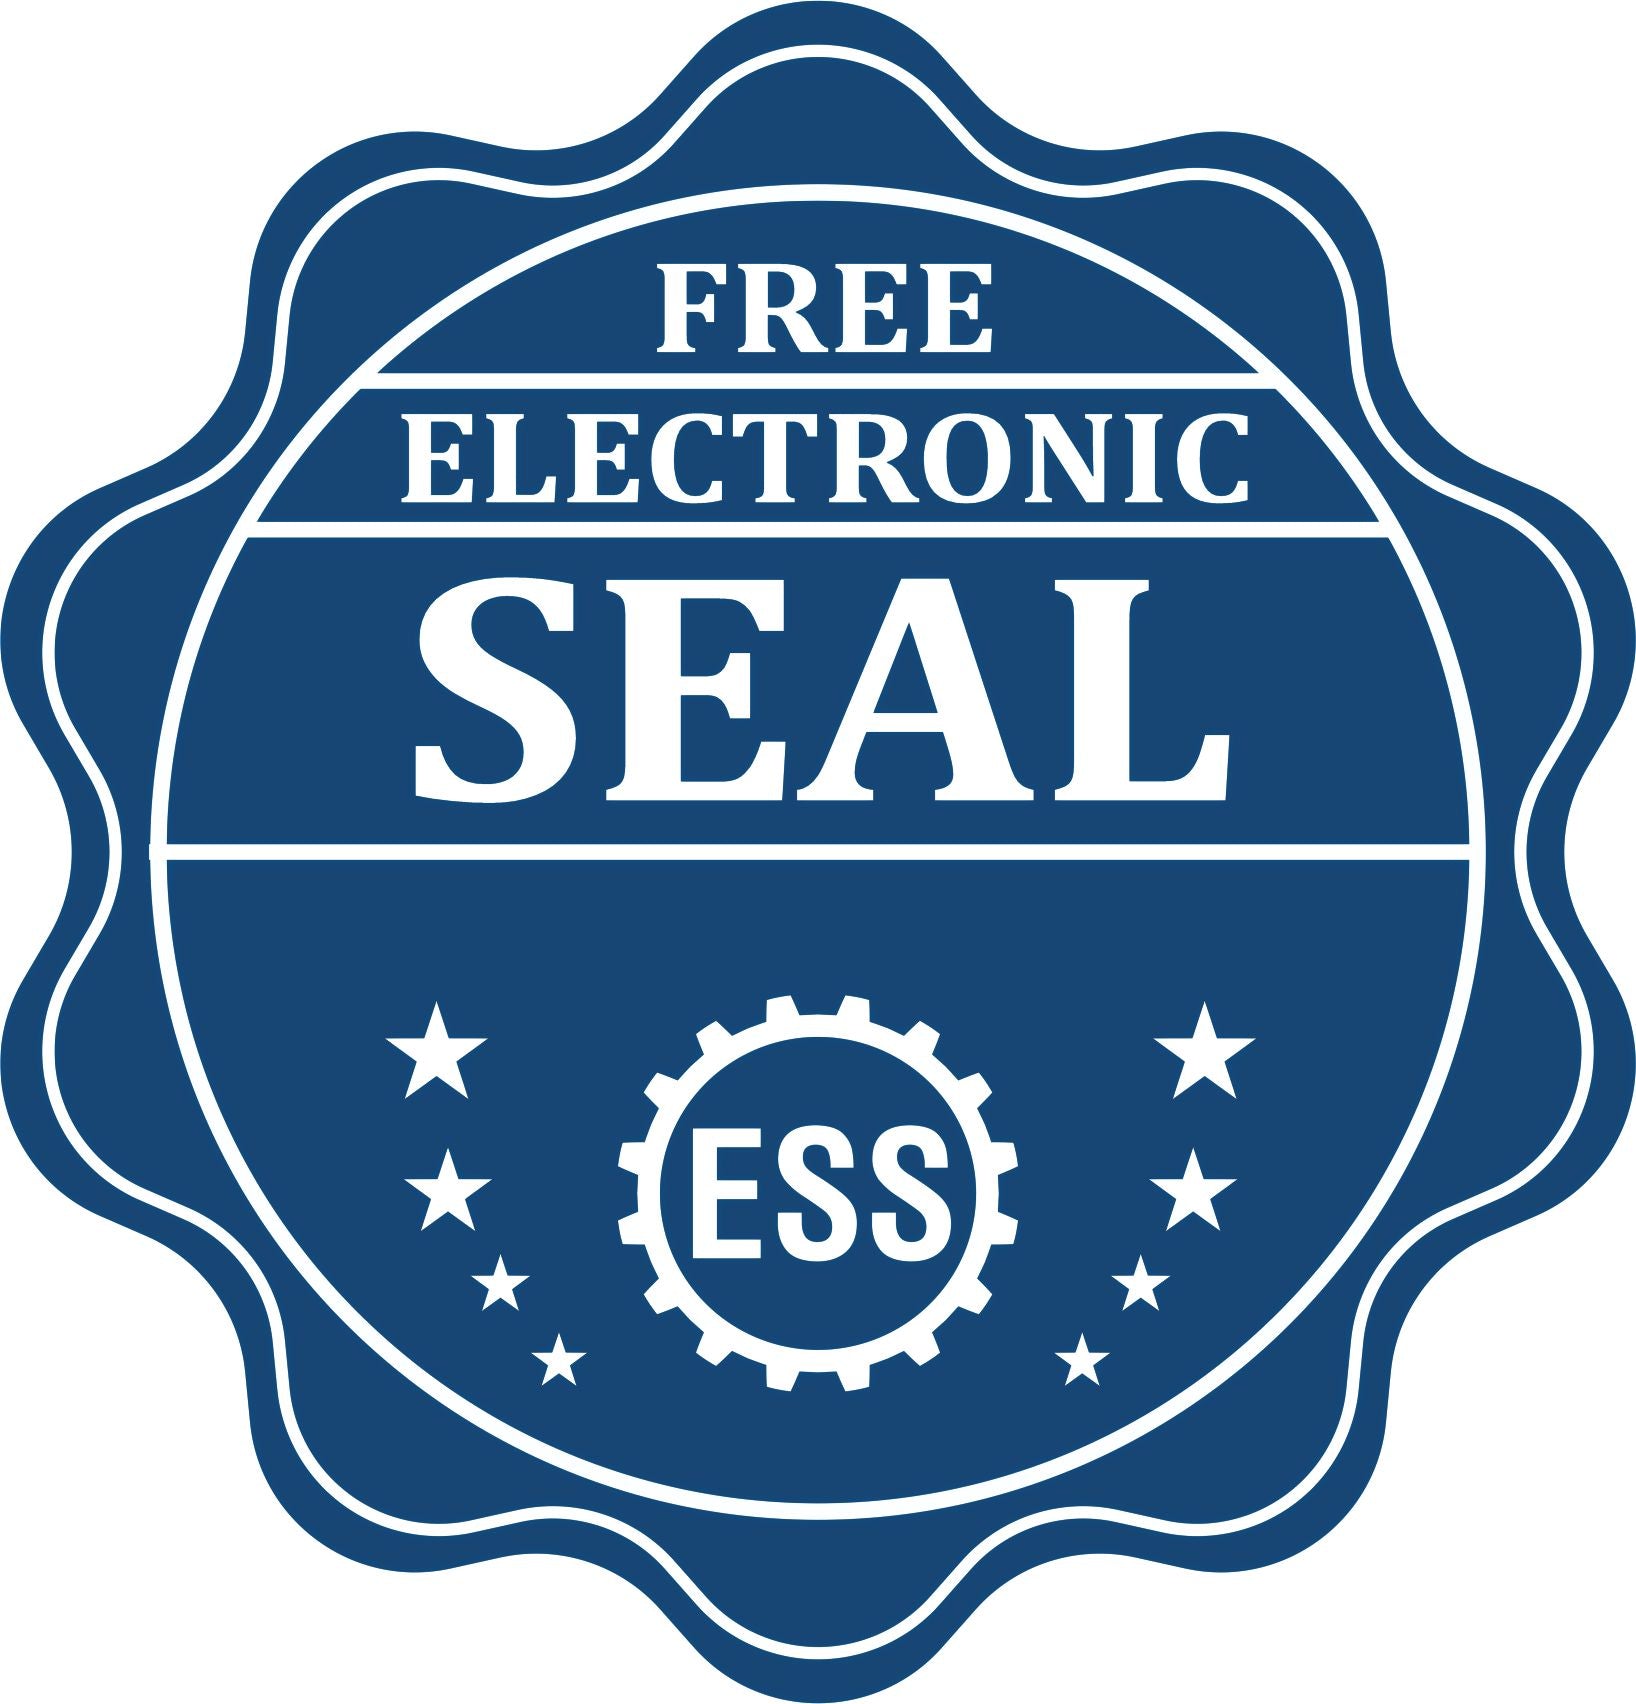 A badge showing a free electronic seal for the Gift Texas Landscape Architect Seal with stars and the ESS gear on the emblem.